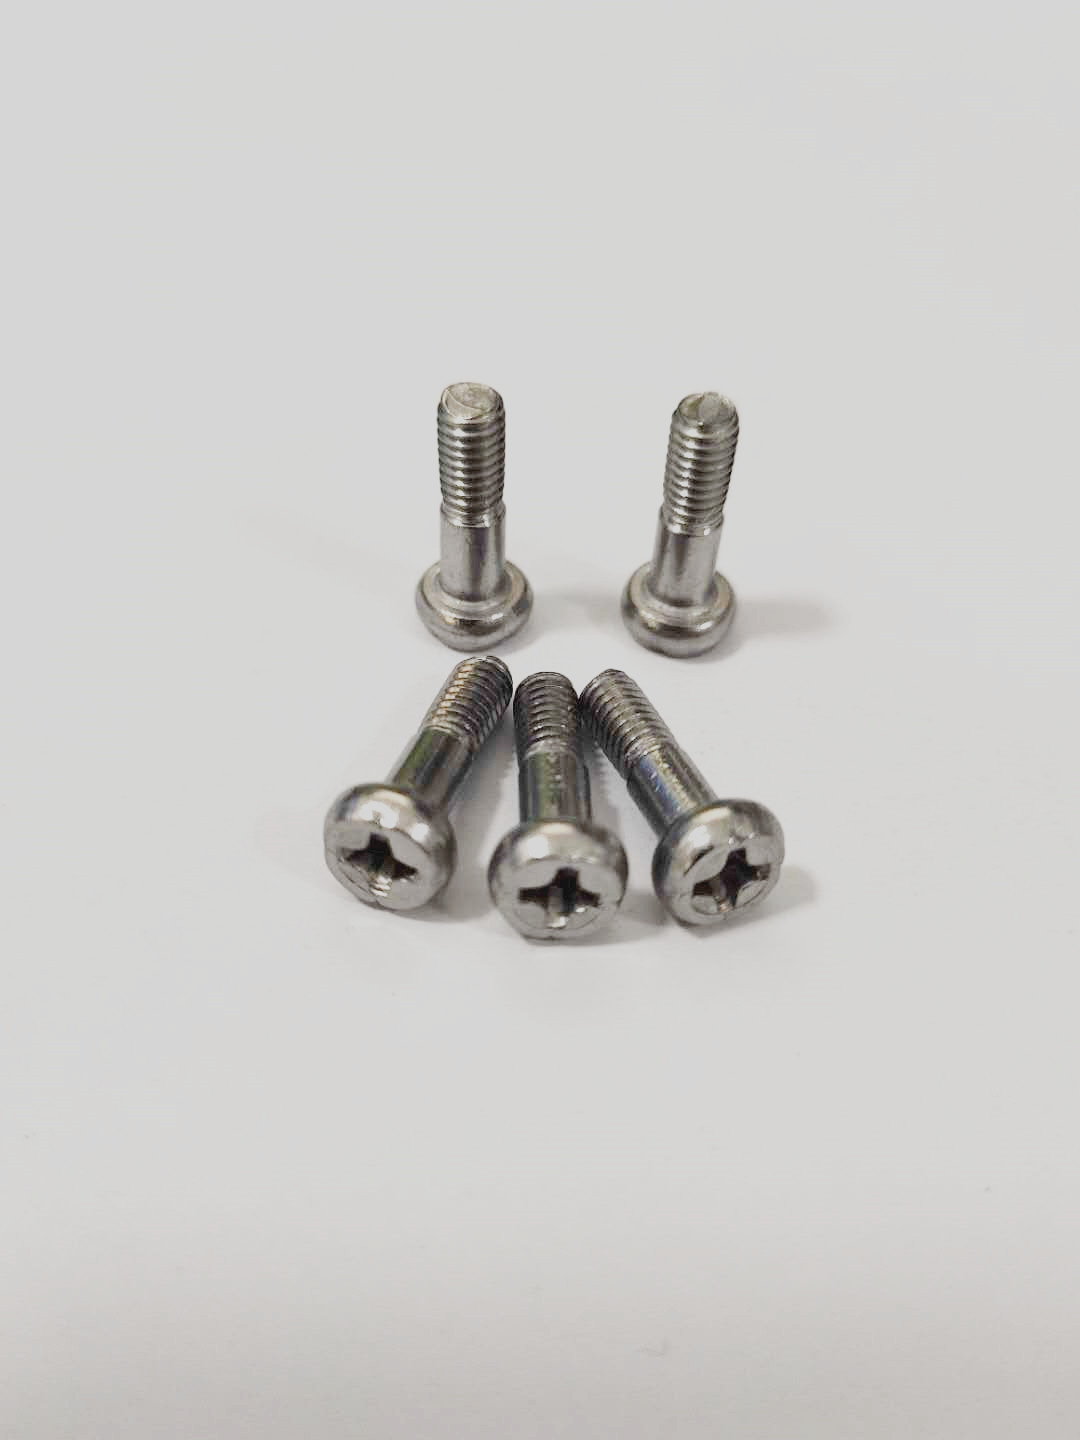 Stainless steel m4 m35 hot sell rotation cross head limit screw